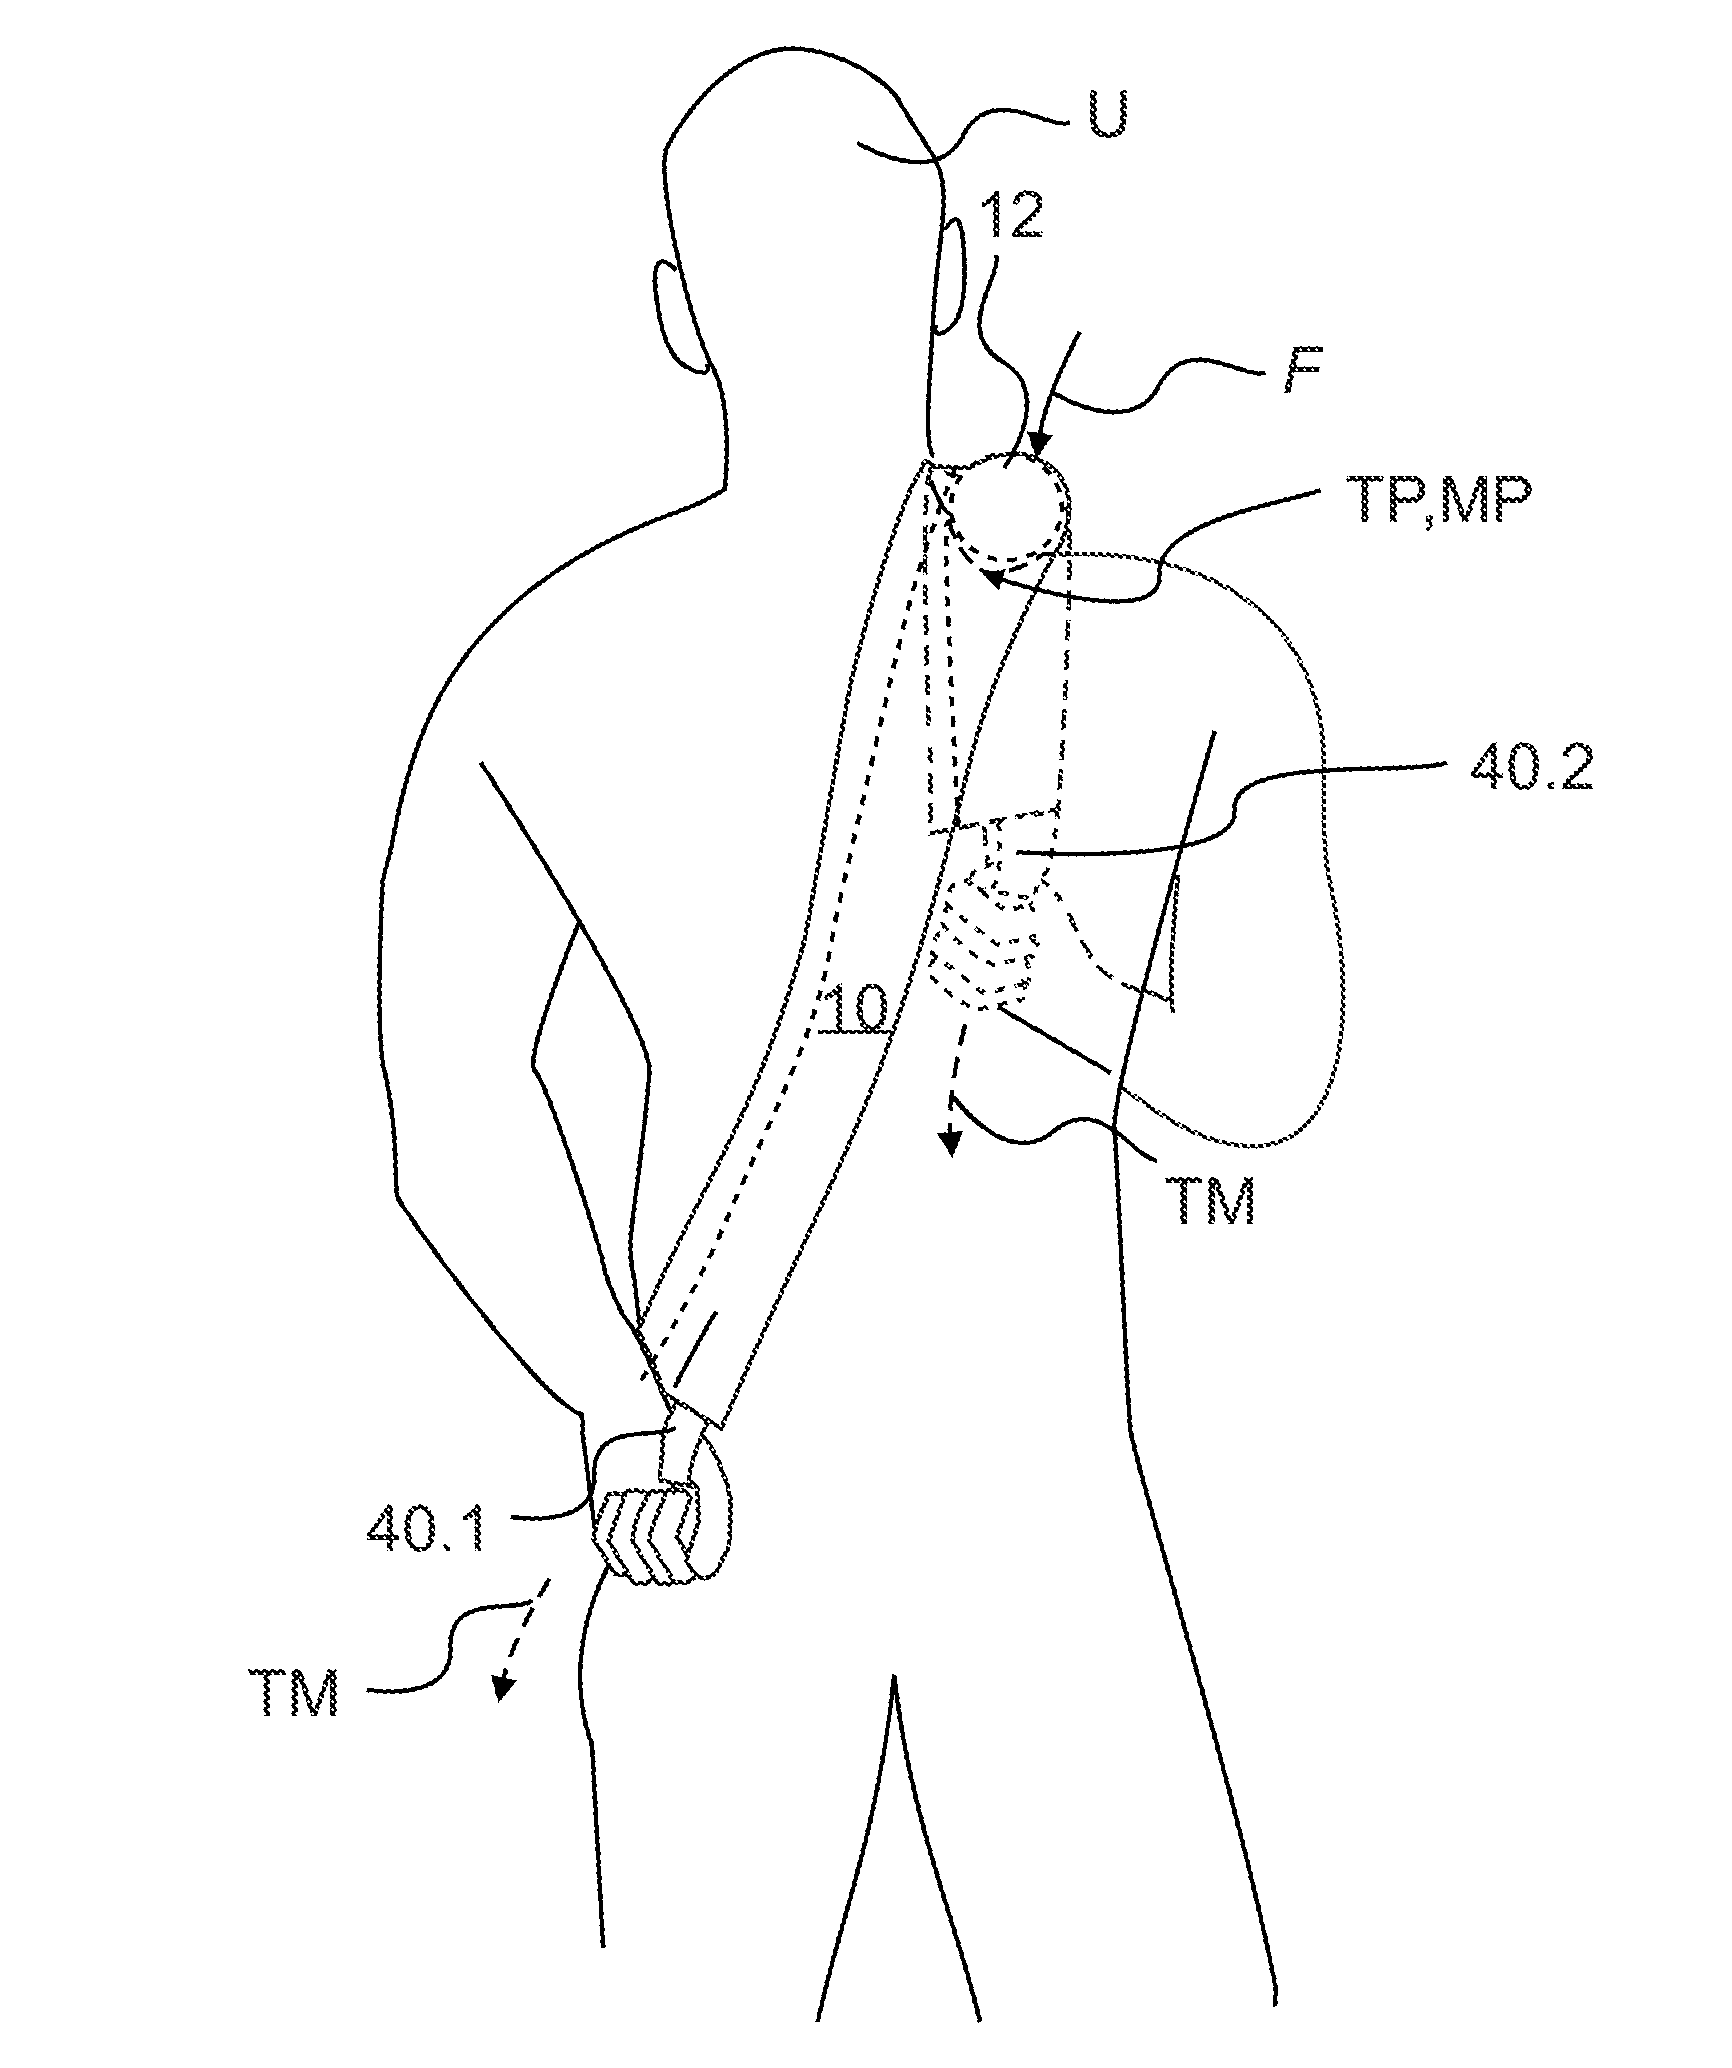 Massage Apparatus and Methods of Use